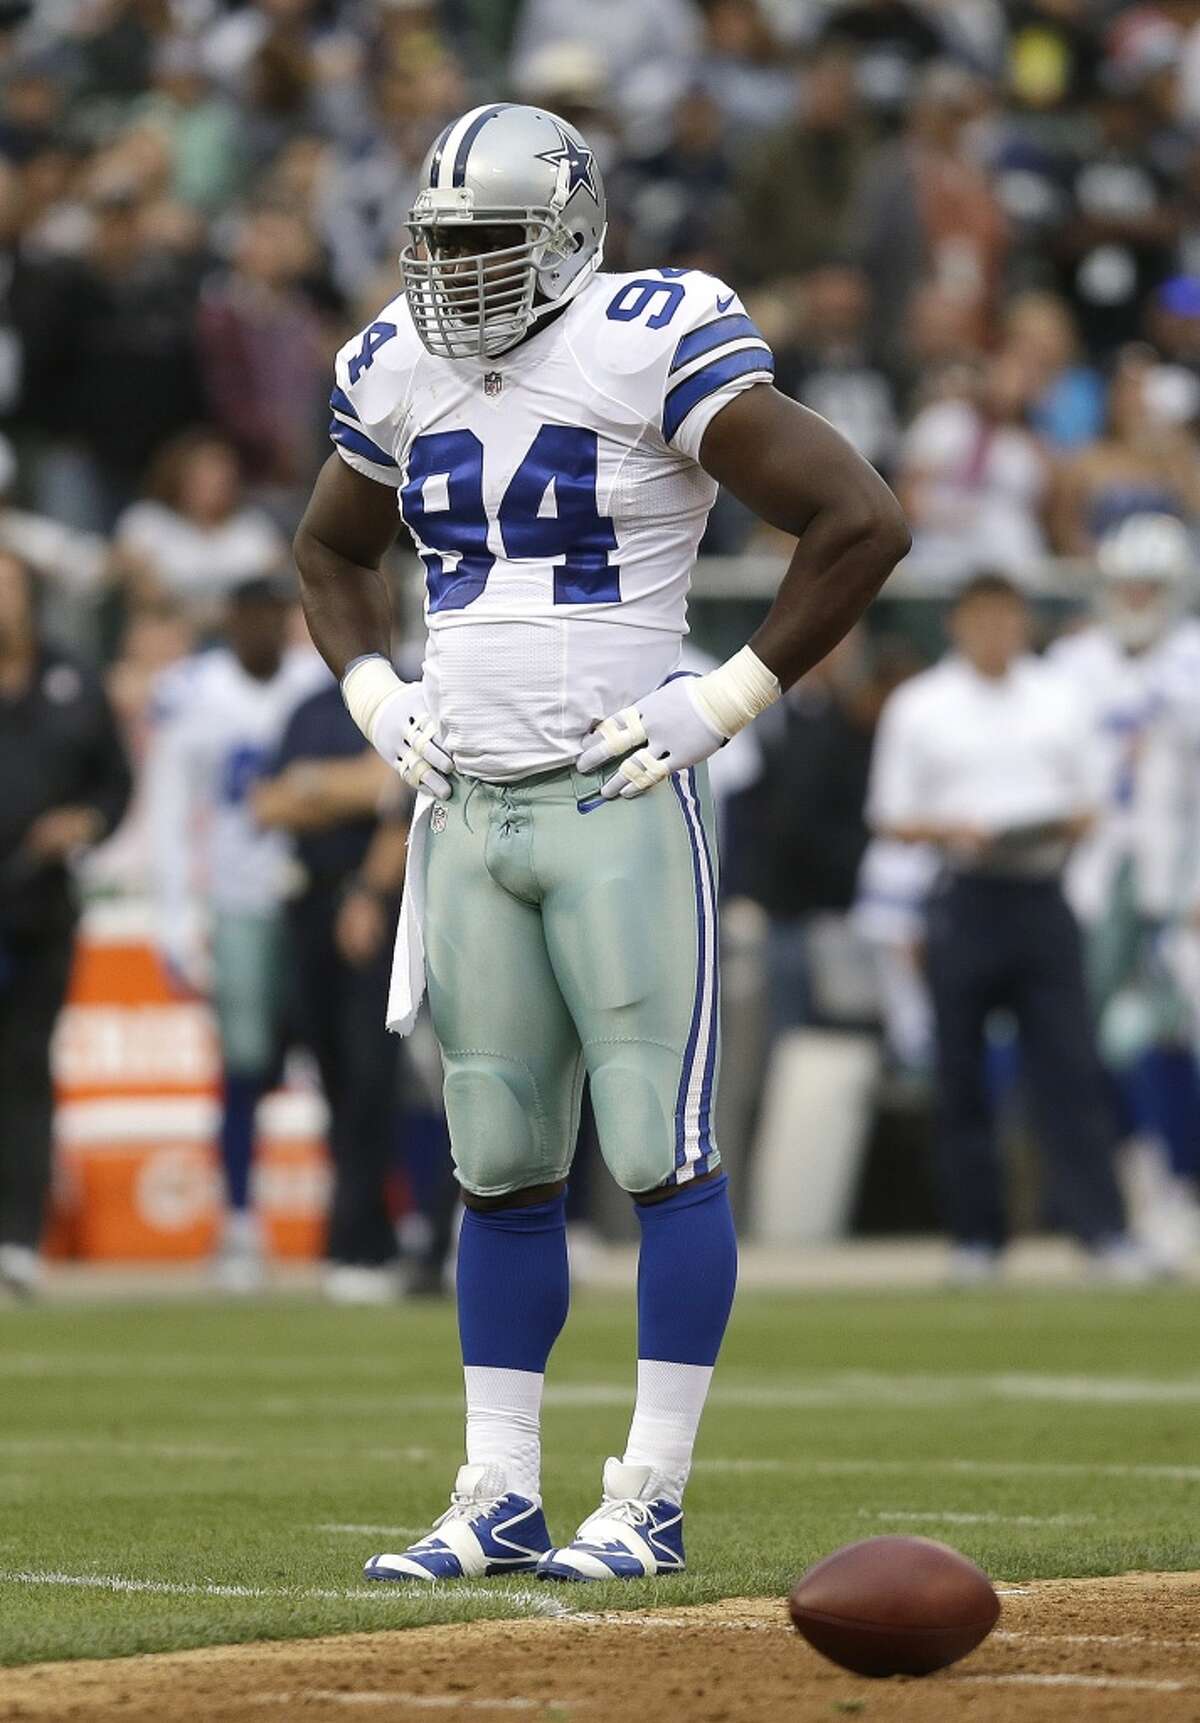 Former Cowboys star DeMarcus Ware retires from NFL